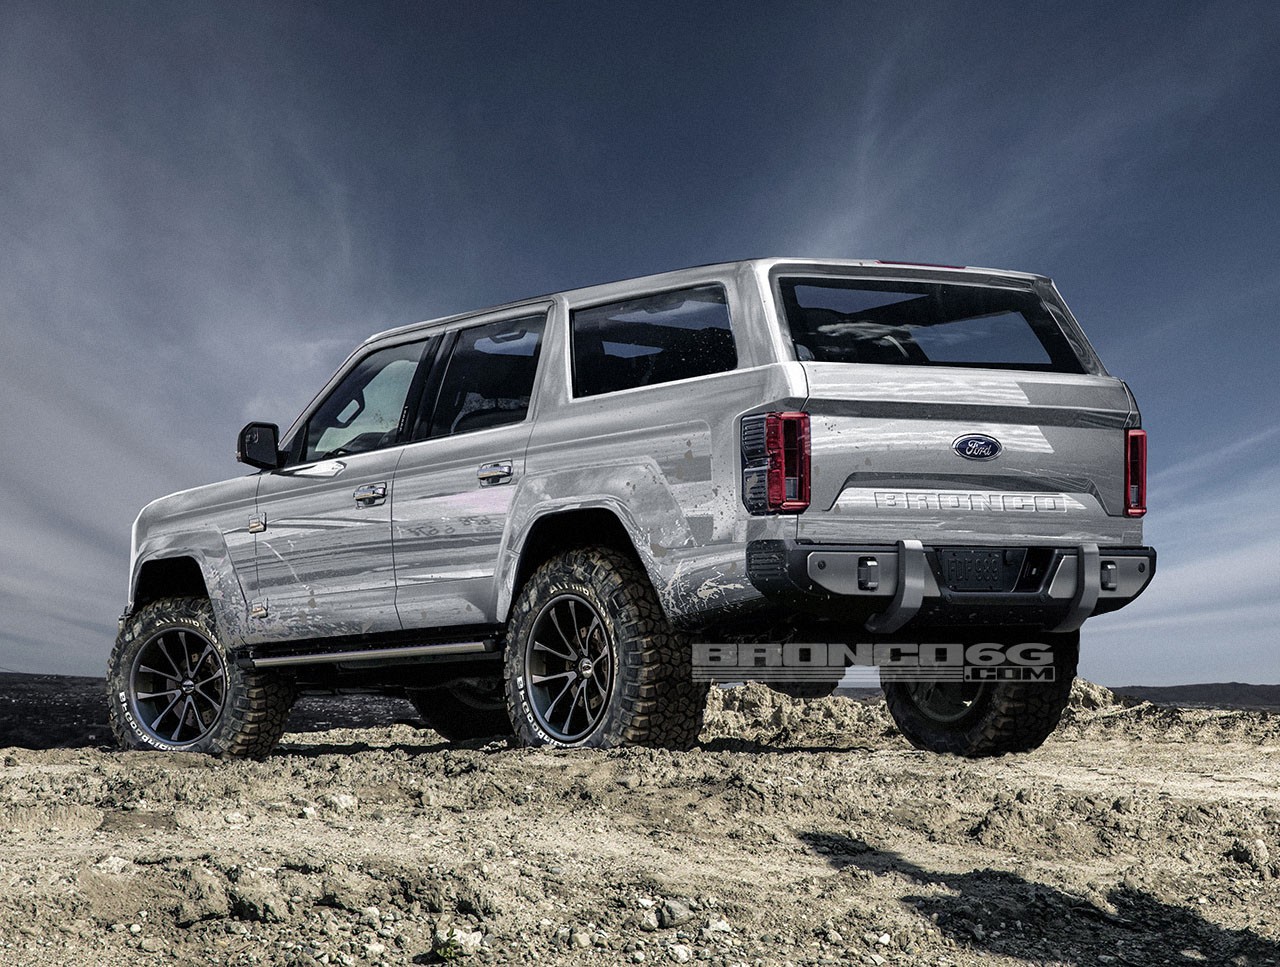 2020 Ford Bronco To Get 325 HP 2.7L EcoBoost V6 According To Report